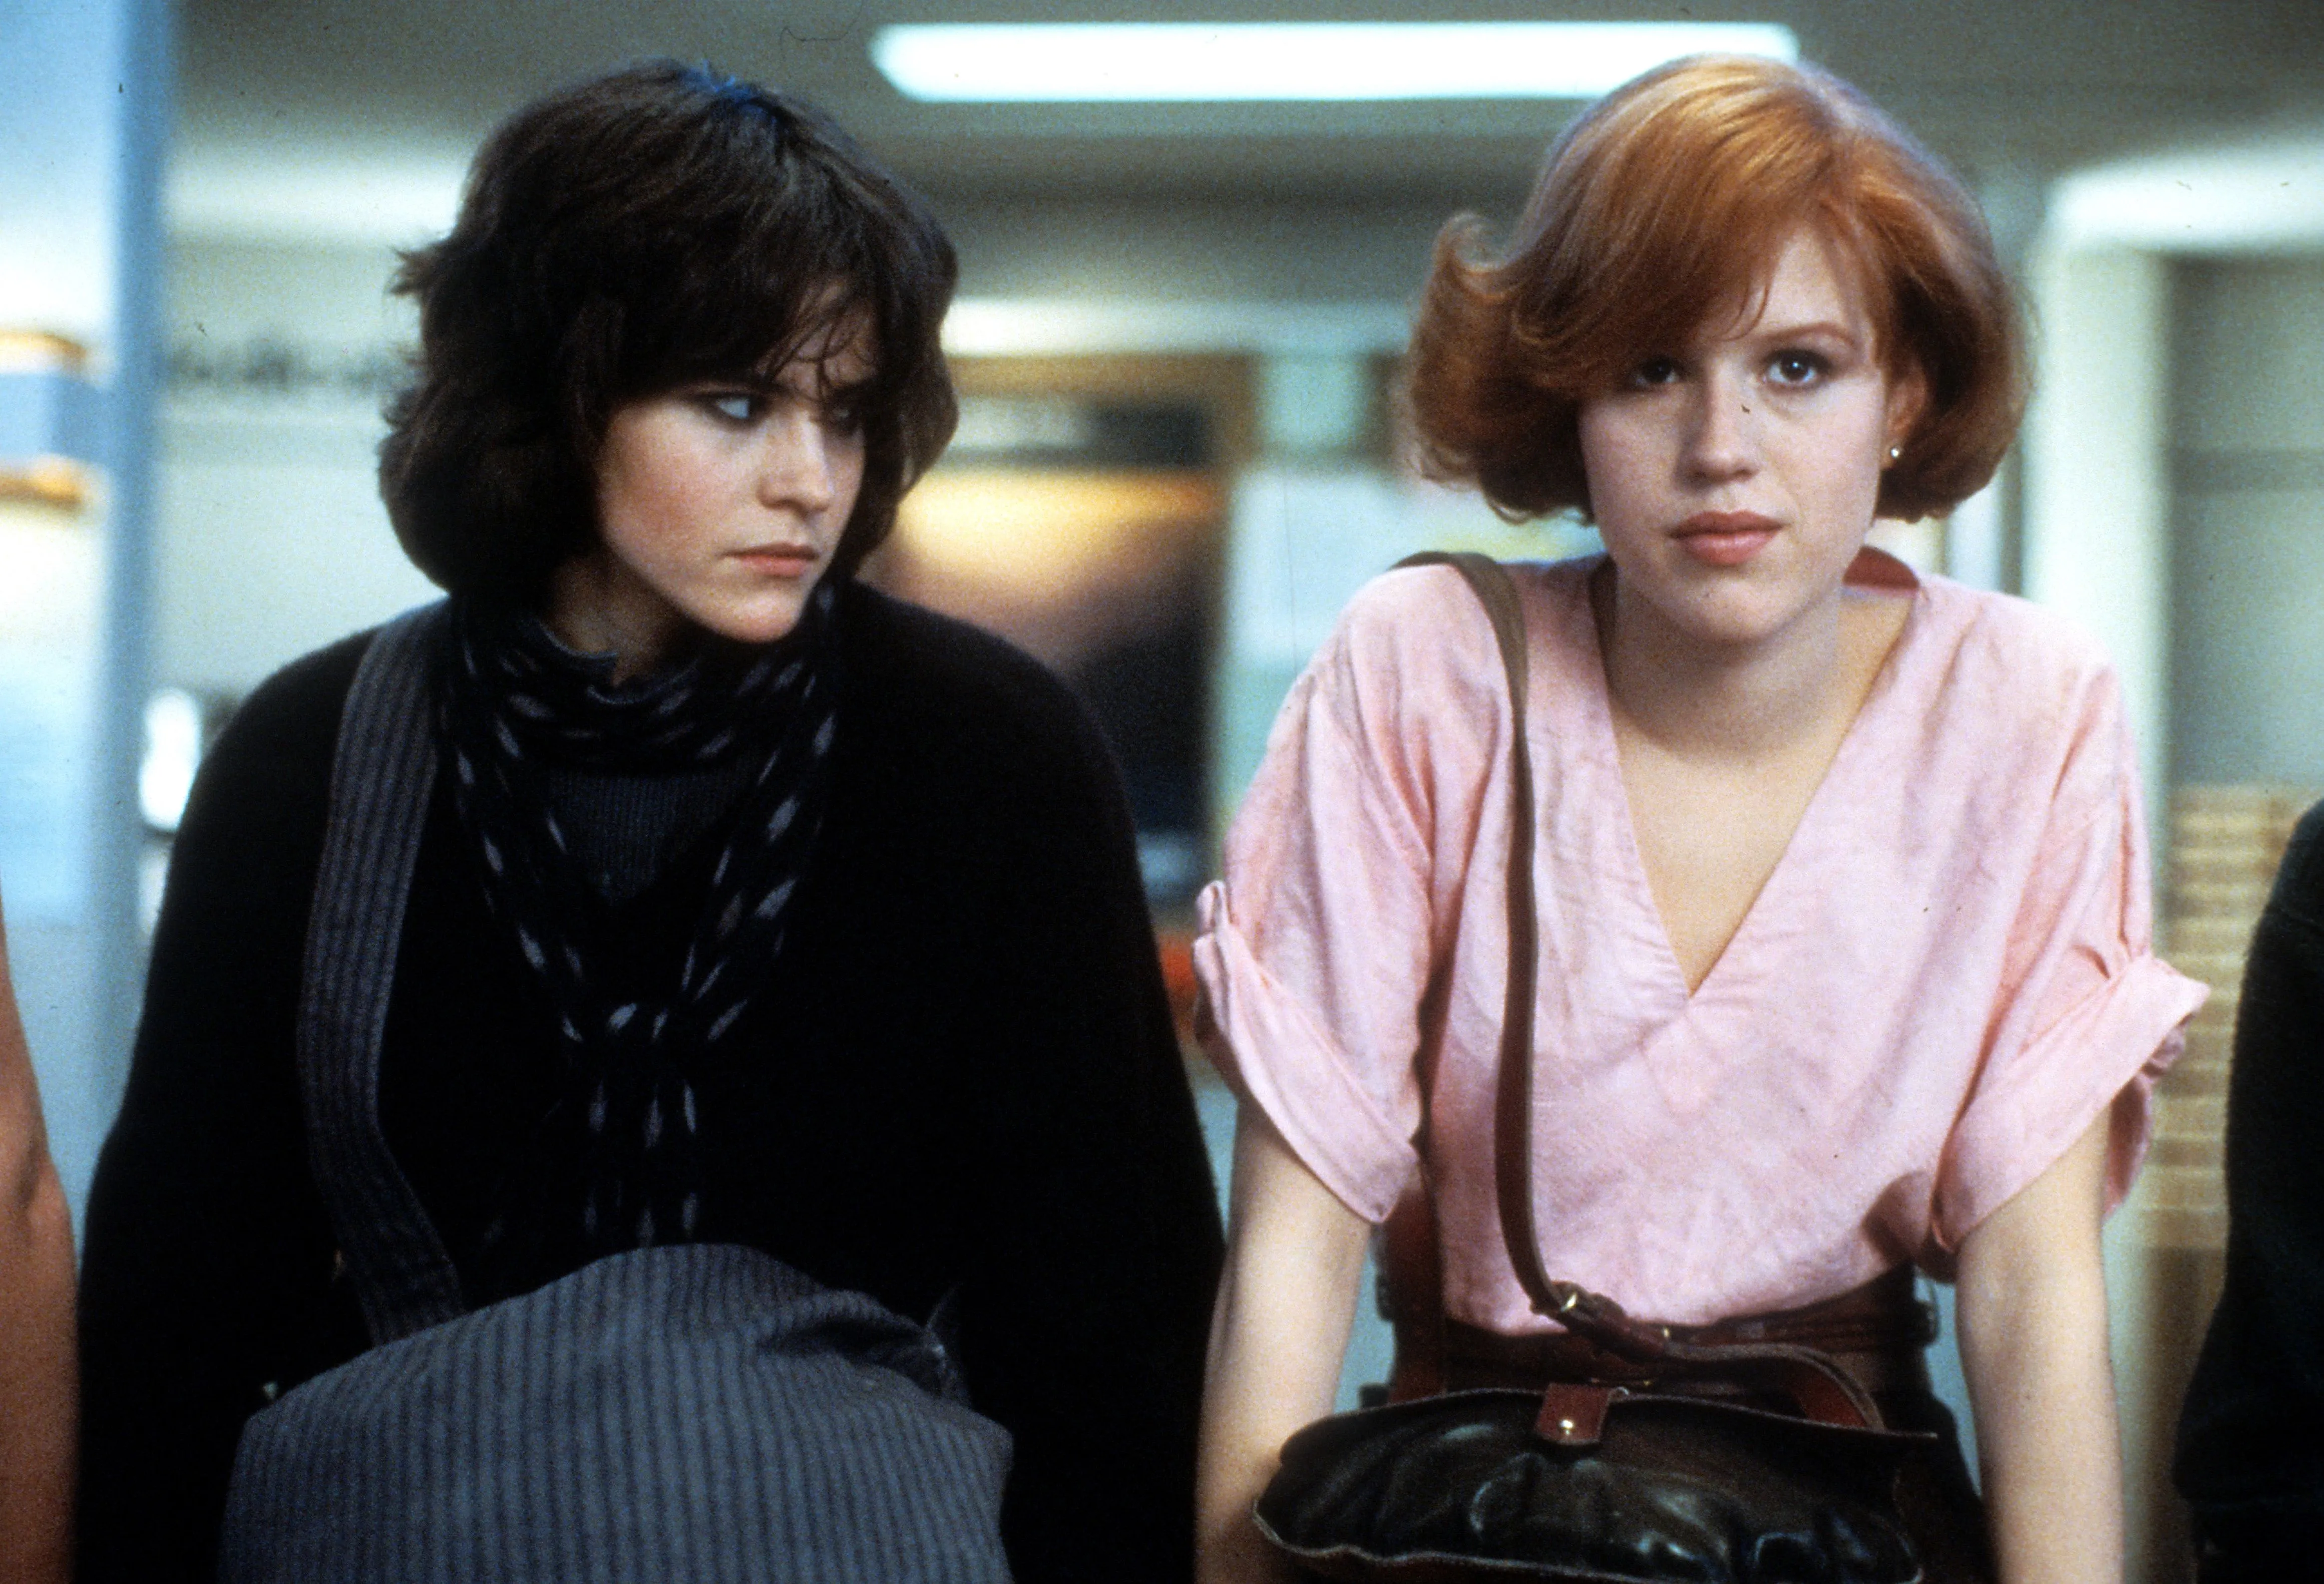 The Breakfast Club' is an antique analysis of adolescent anguish